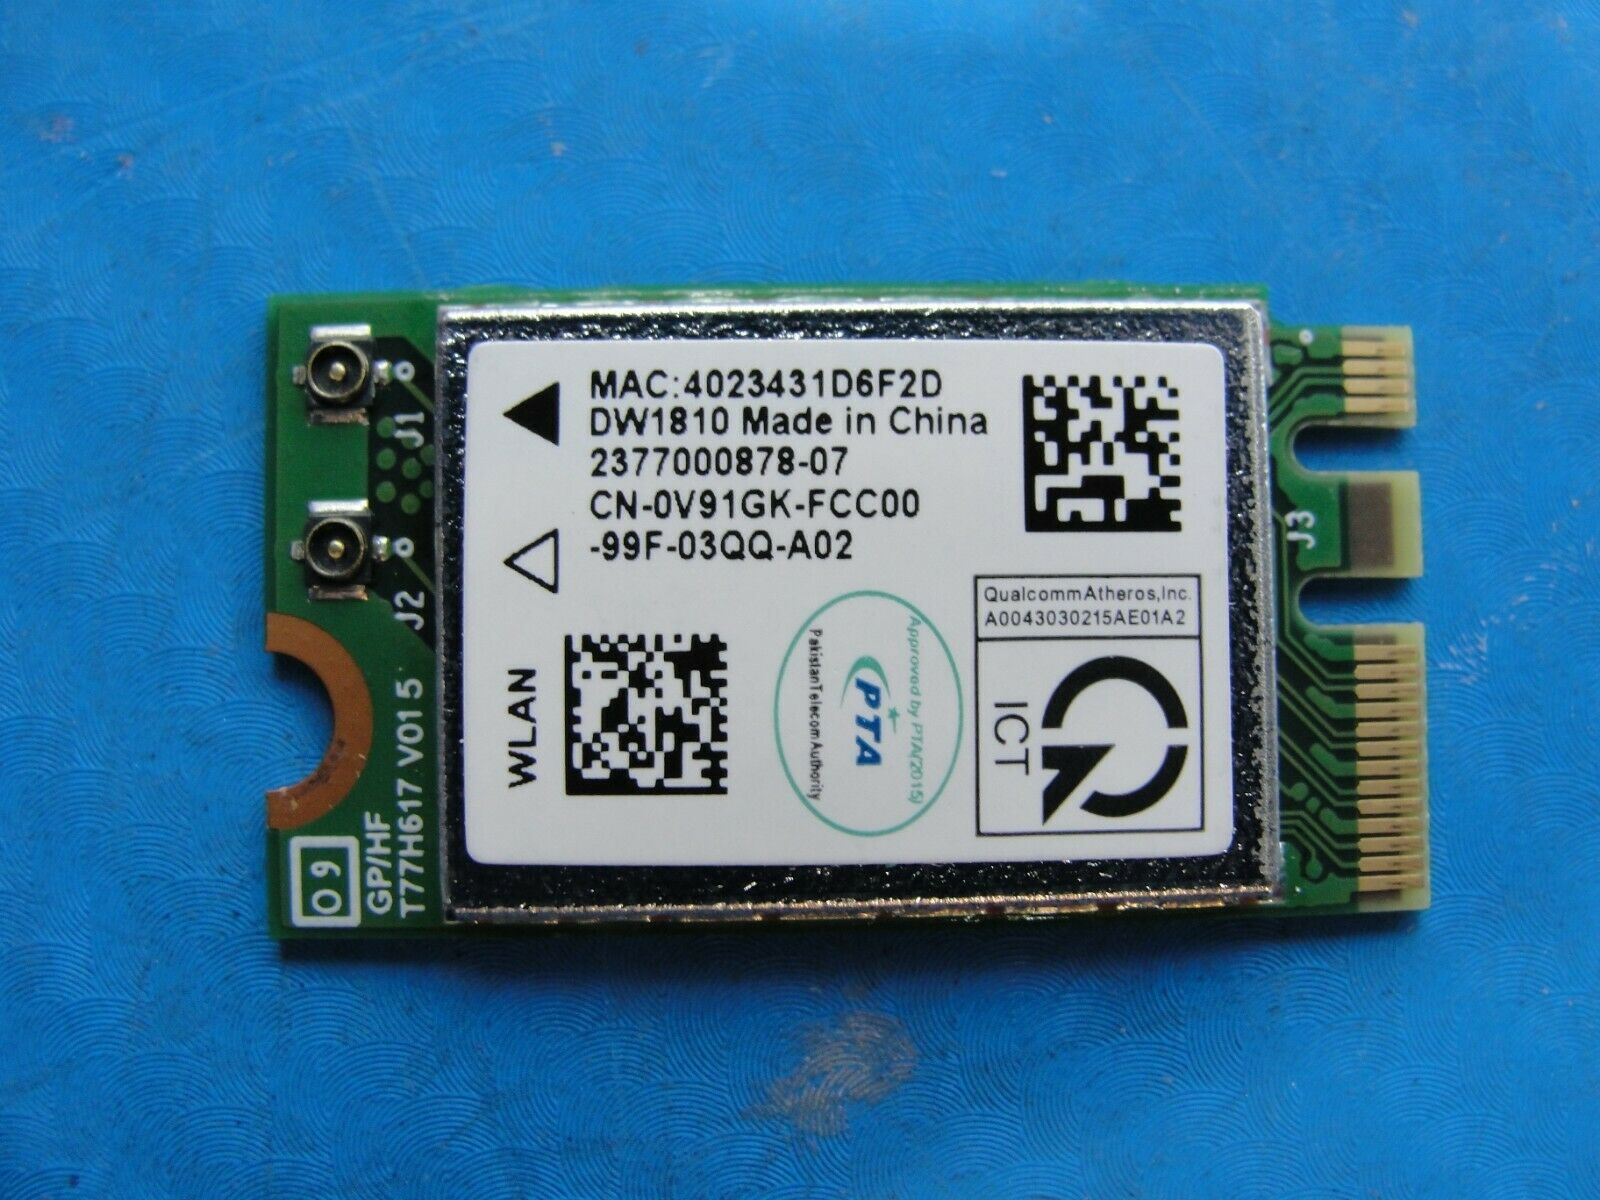 Dell 5593 SK Hynix 256GB NVMe M.2 SSD Solid State Drive 759g2 hfm256gdgtng-83a0a - Laptop Parts - Buy Authentic Computer Parts - Top Seller Ebay